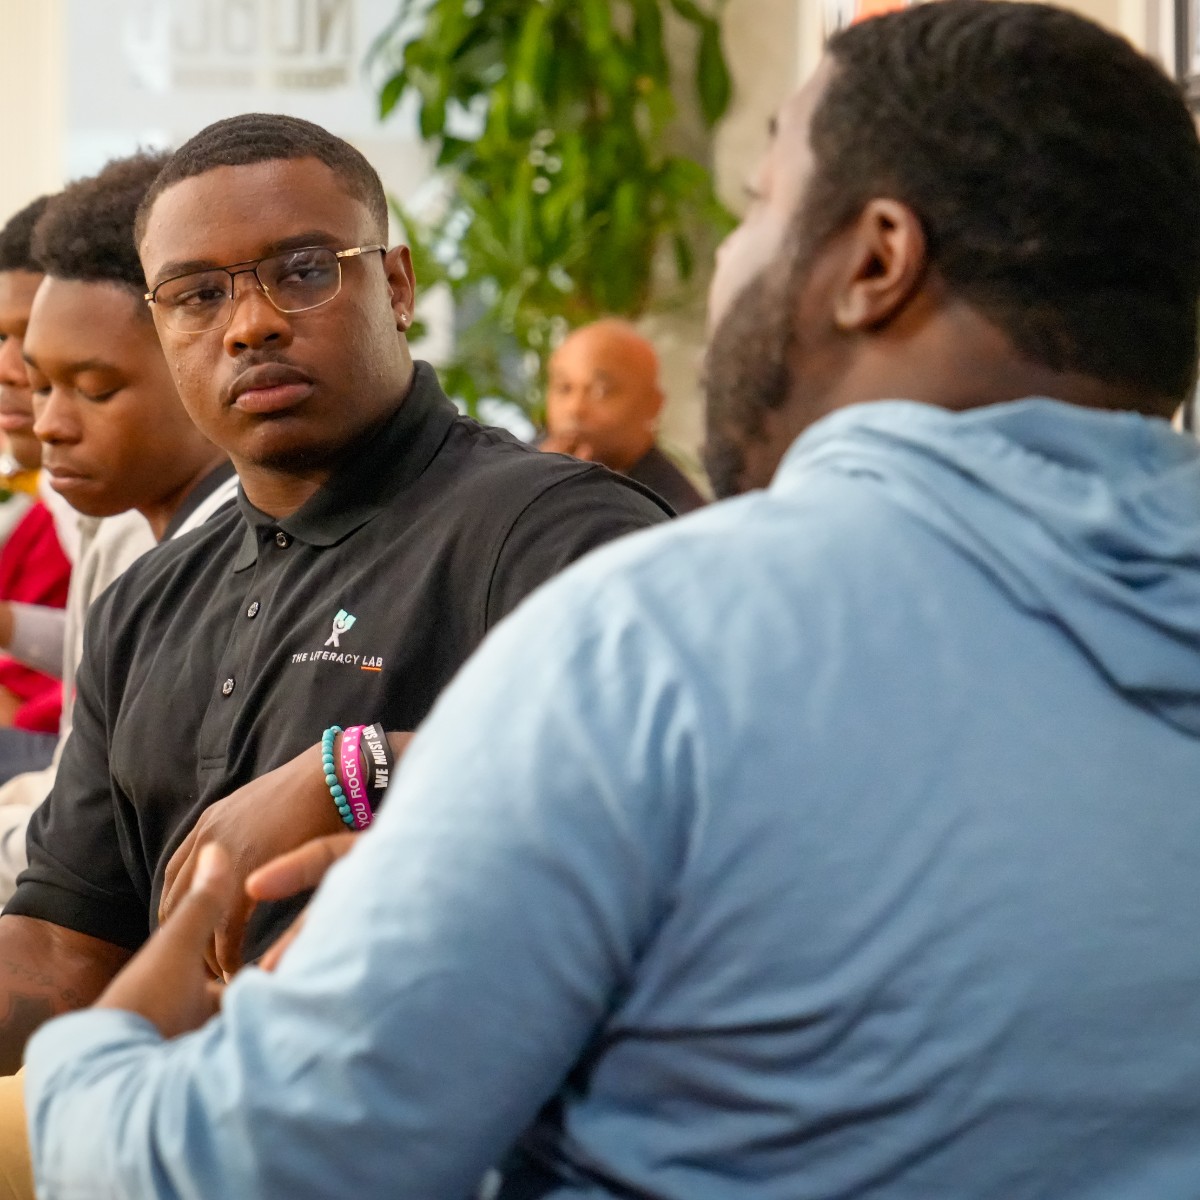 Connections. It's the center of our ongoing #CPSBarbershopTalk series, where Black men, role models, educators, students and community leaders can get together and discuss the importance of Black male educators in classrooms. T Watch our #BMESummit at: brnw.ch/21wJ996